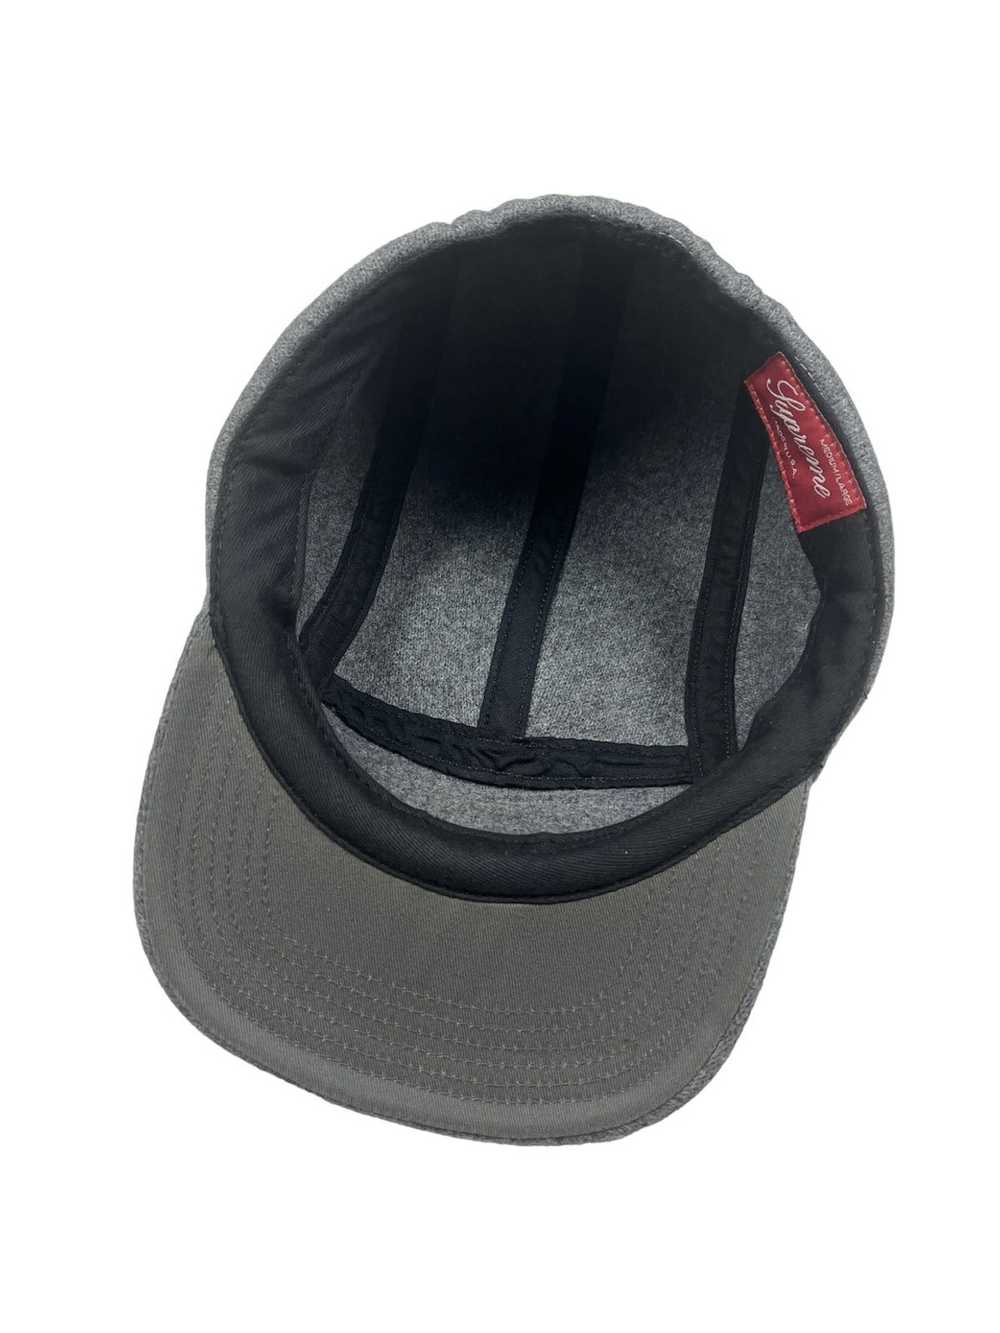 Supreme Supreme Wool Fitted Camp Cap - image 8